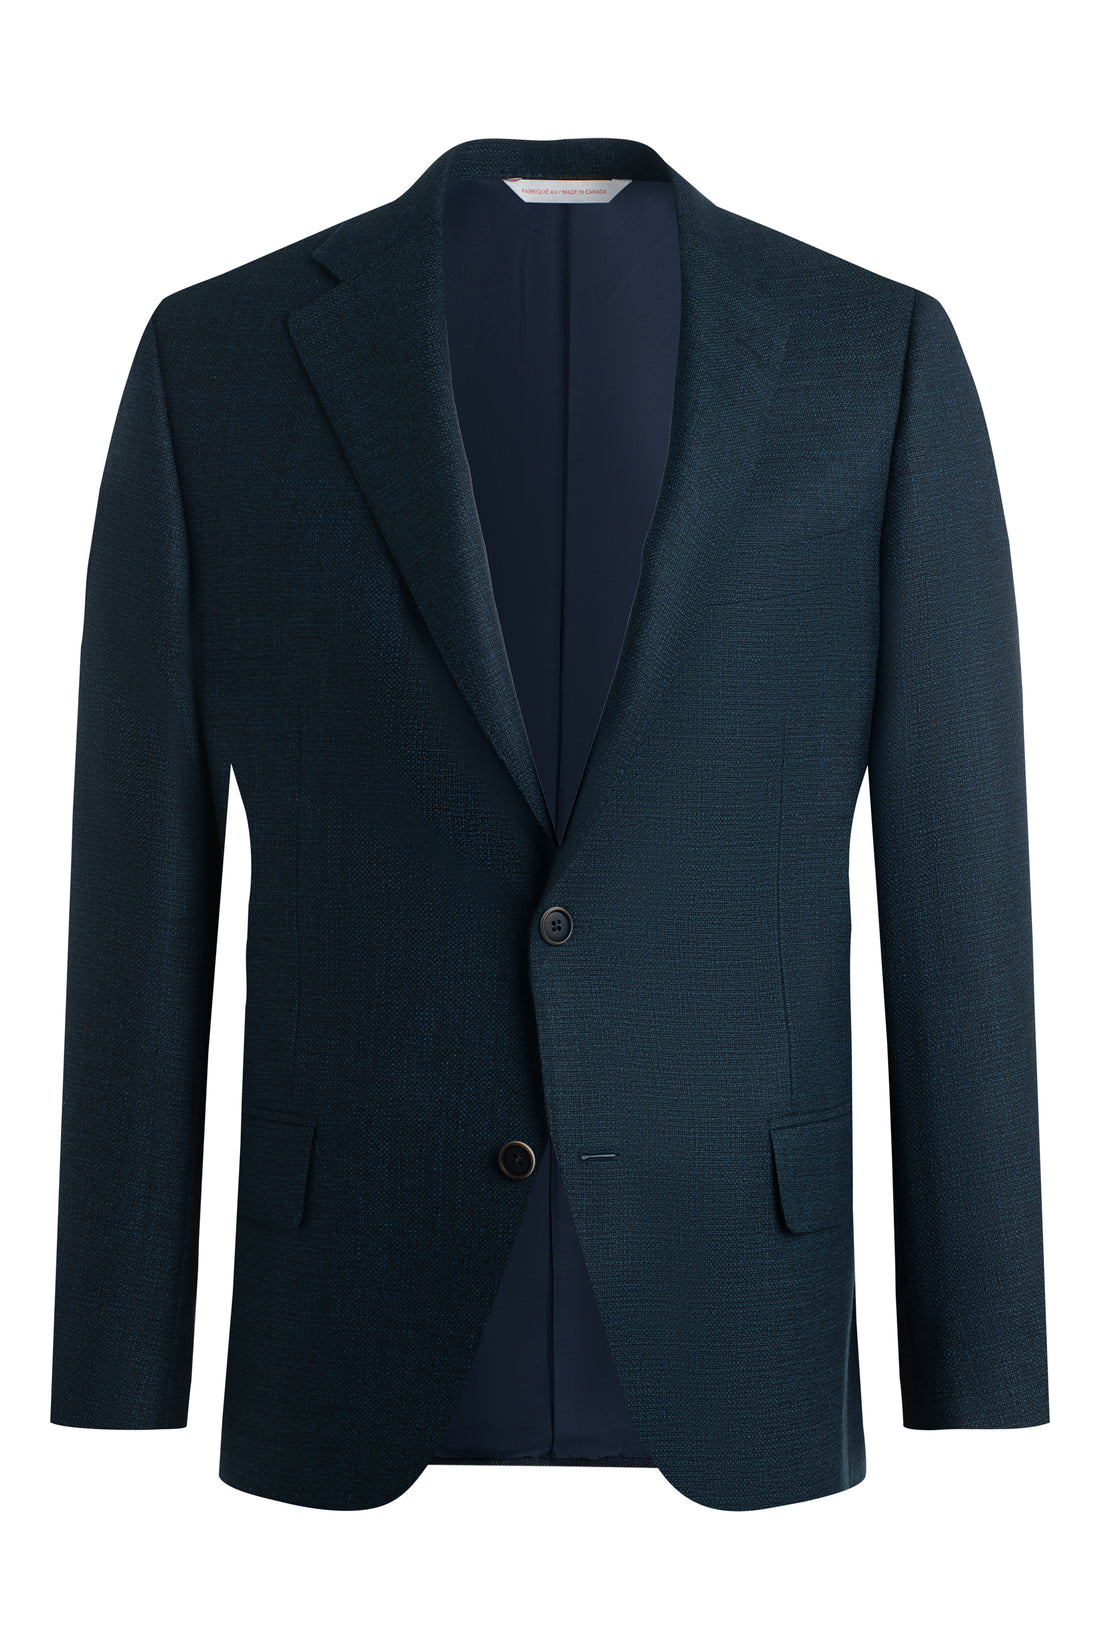 Blue Green Textured Classic Fit Jacket